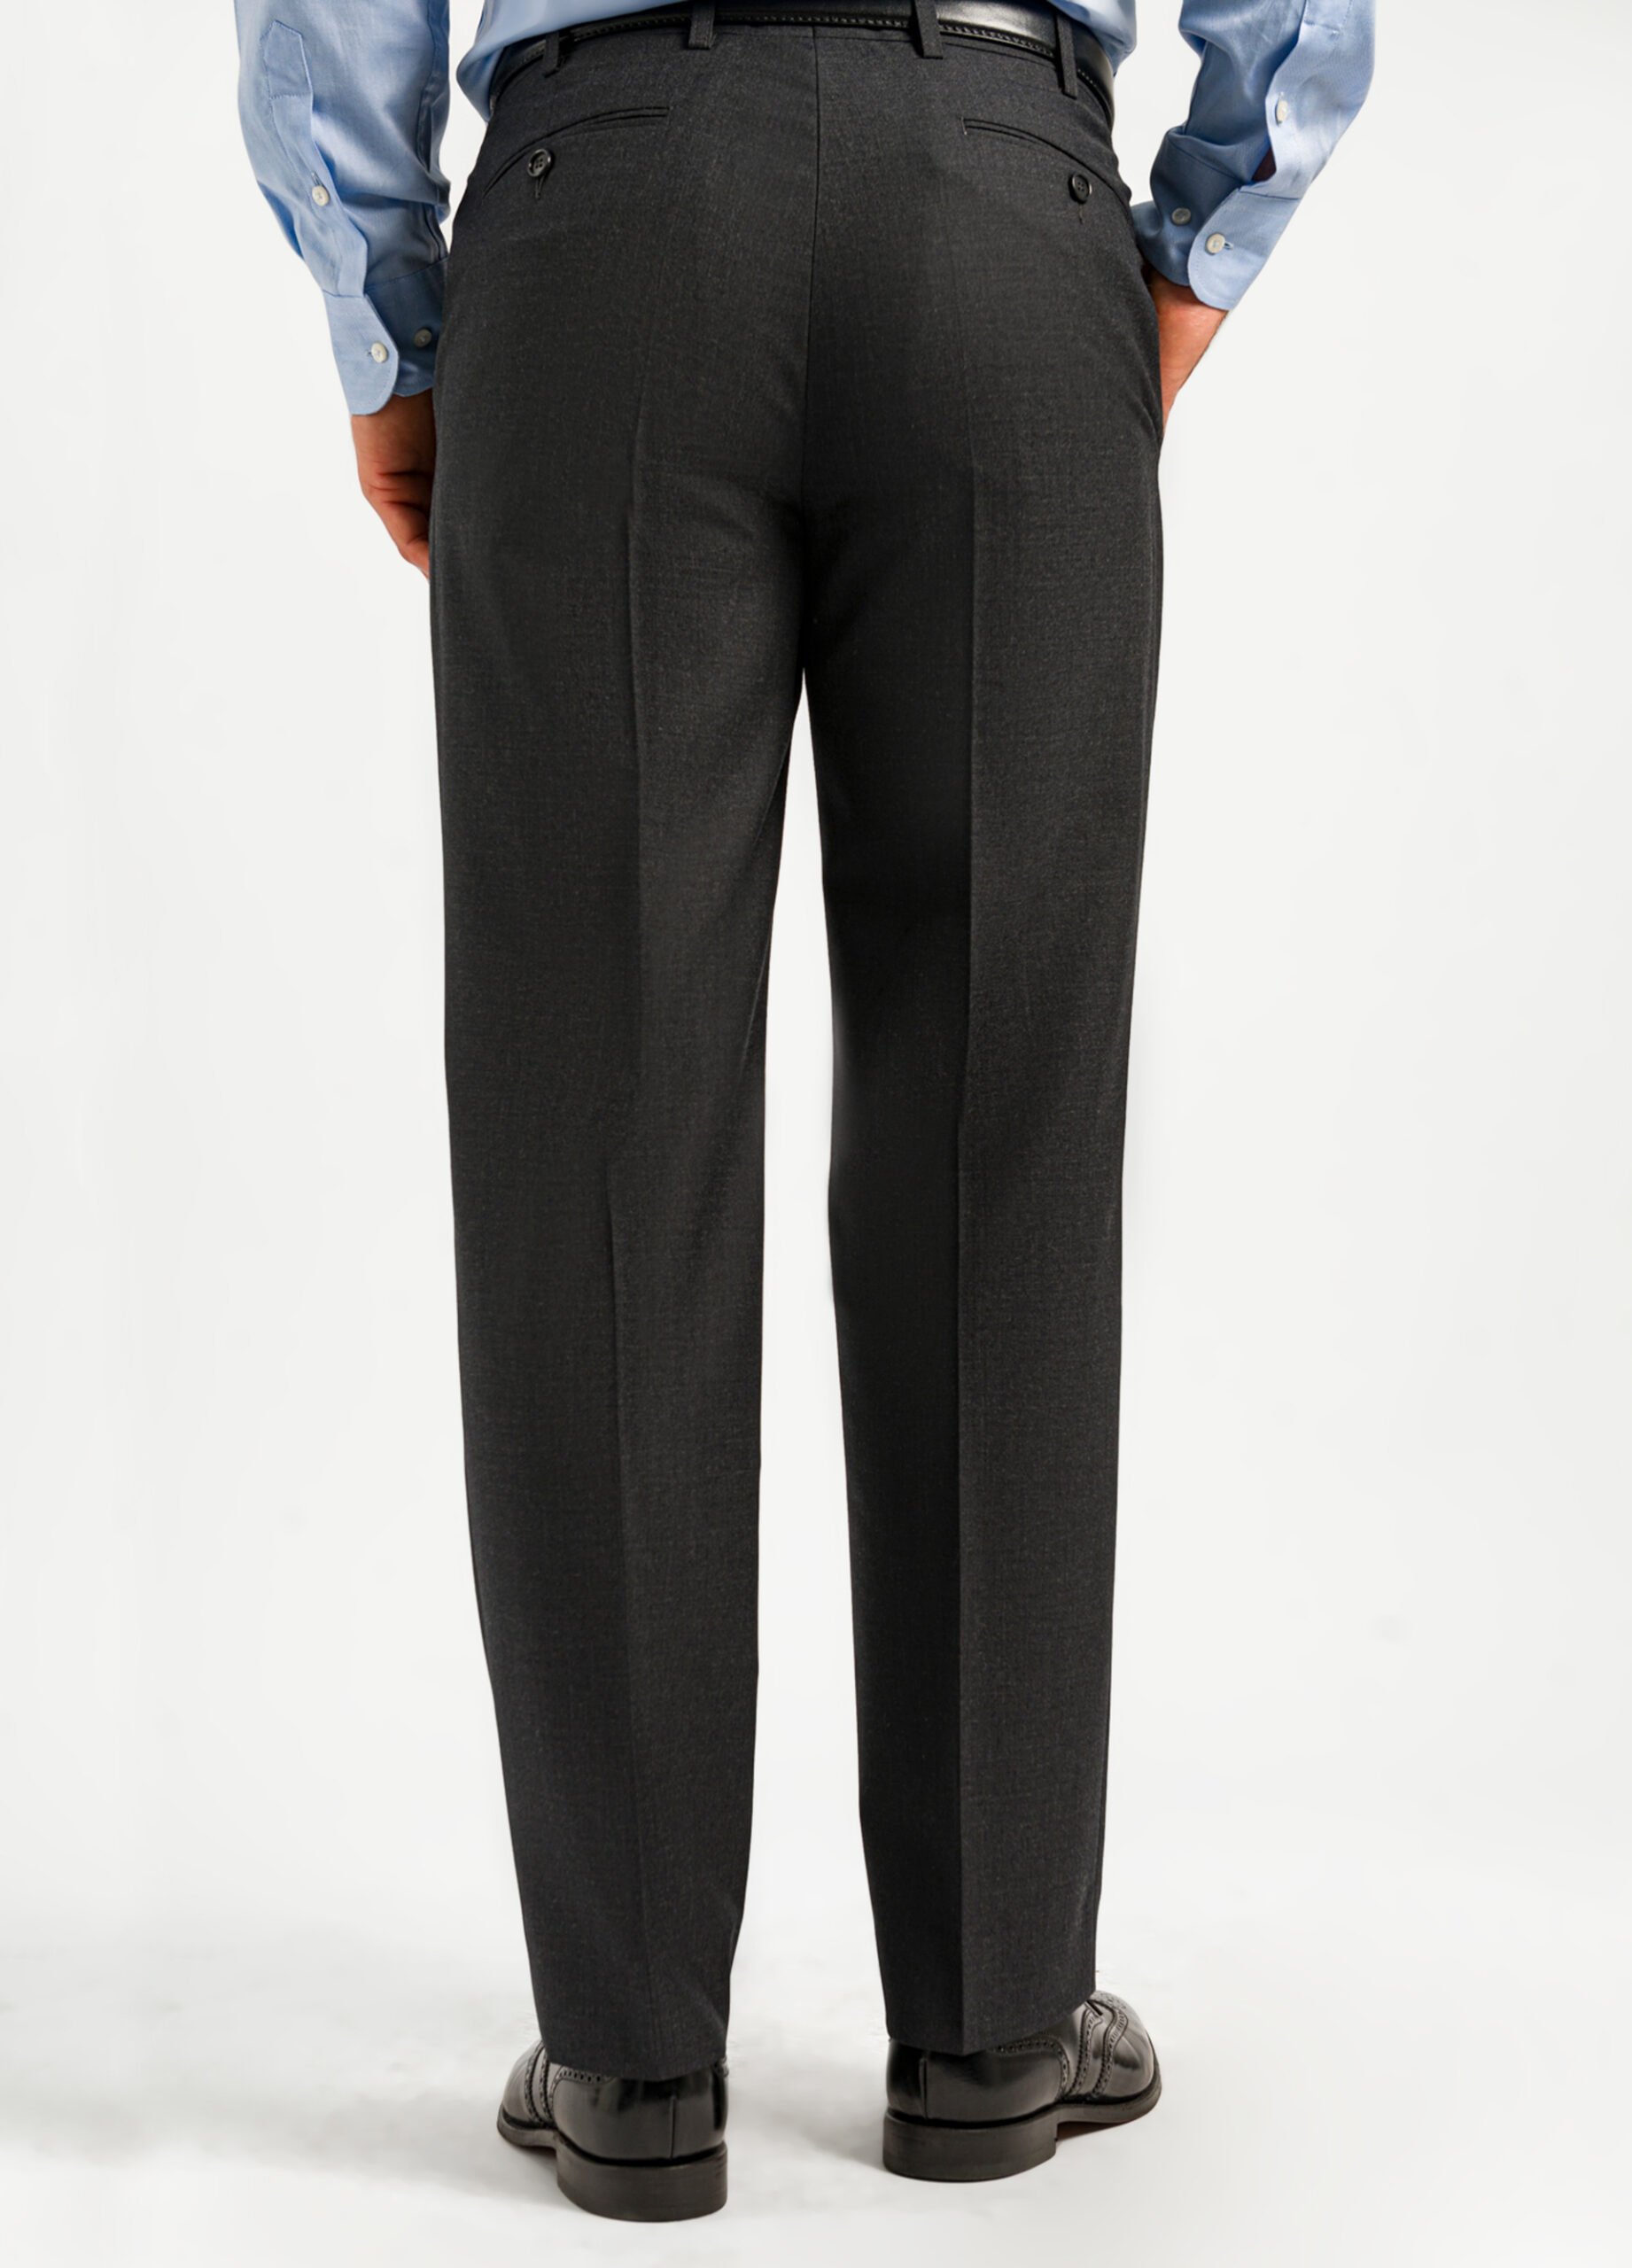 Grey formal light weight trousers seat